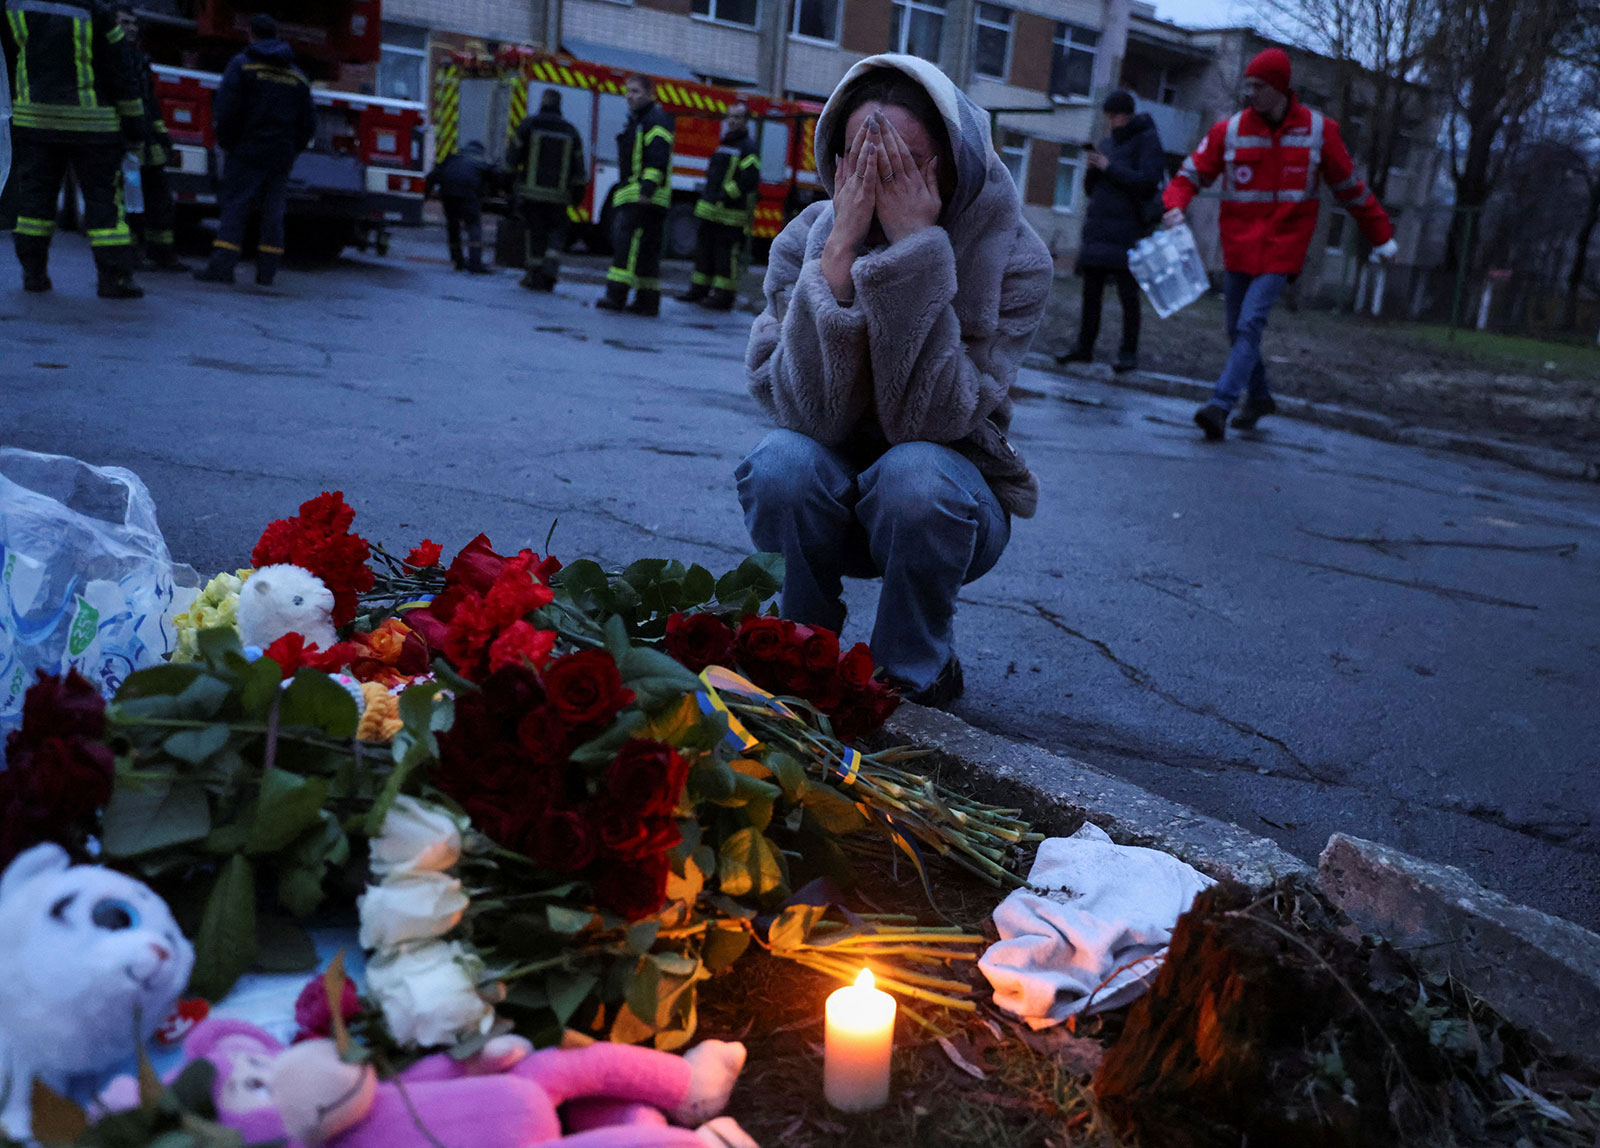 A woman cries next to a memorial for victims near the site of the helicopter crash in Brovary on Wednesday. 